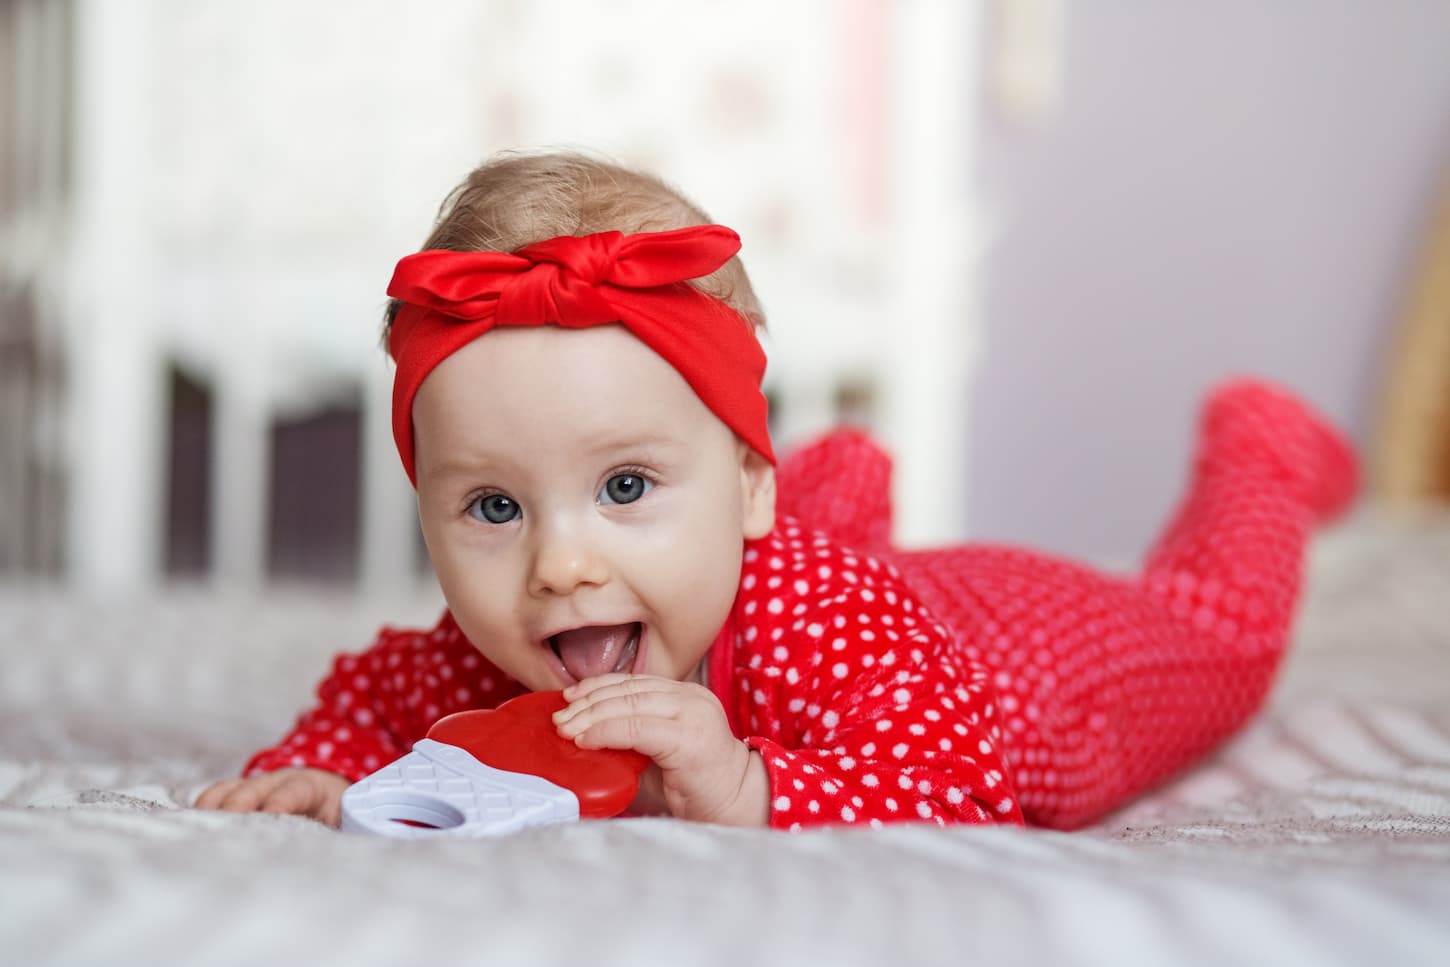 An image of a Little 6 months old baby in a red sleepsuit and headband lying on the bed on her stomach.